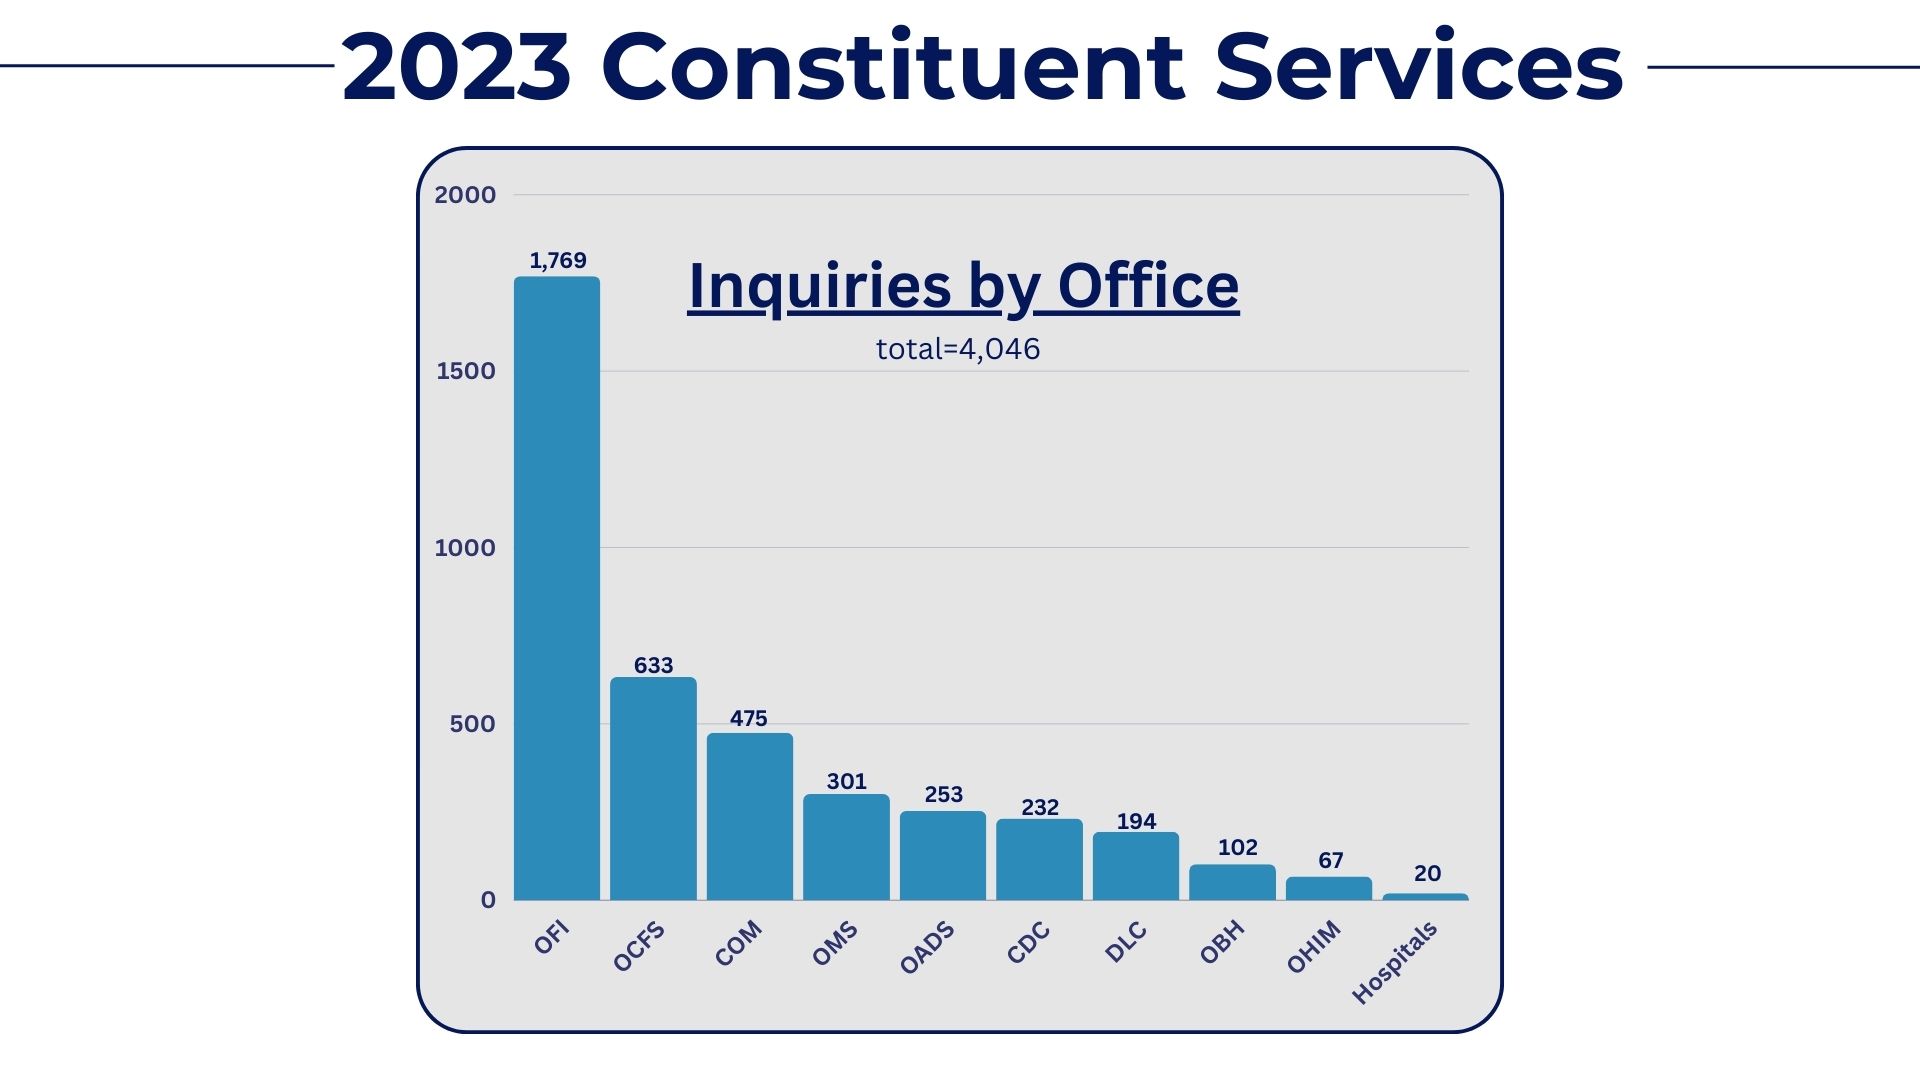 Chart showing inquiries by office in 2023